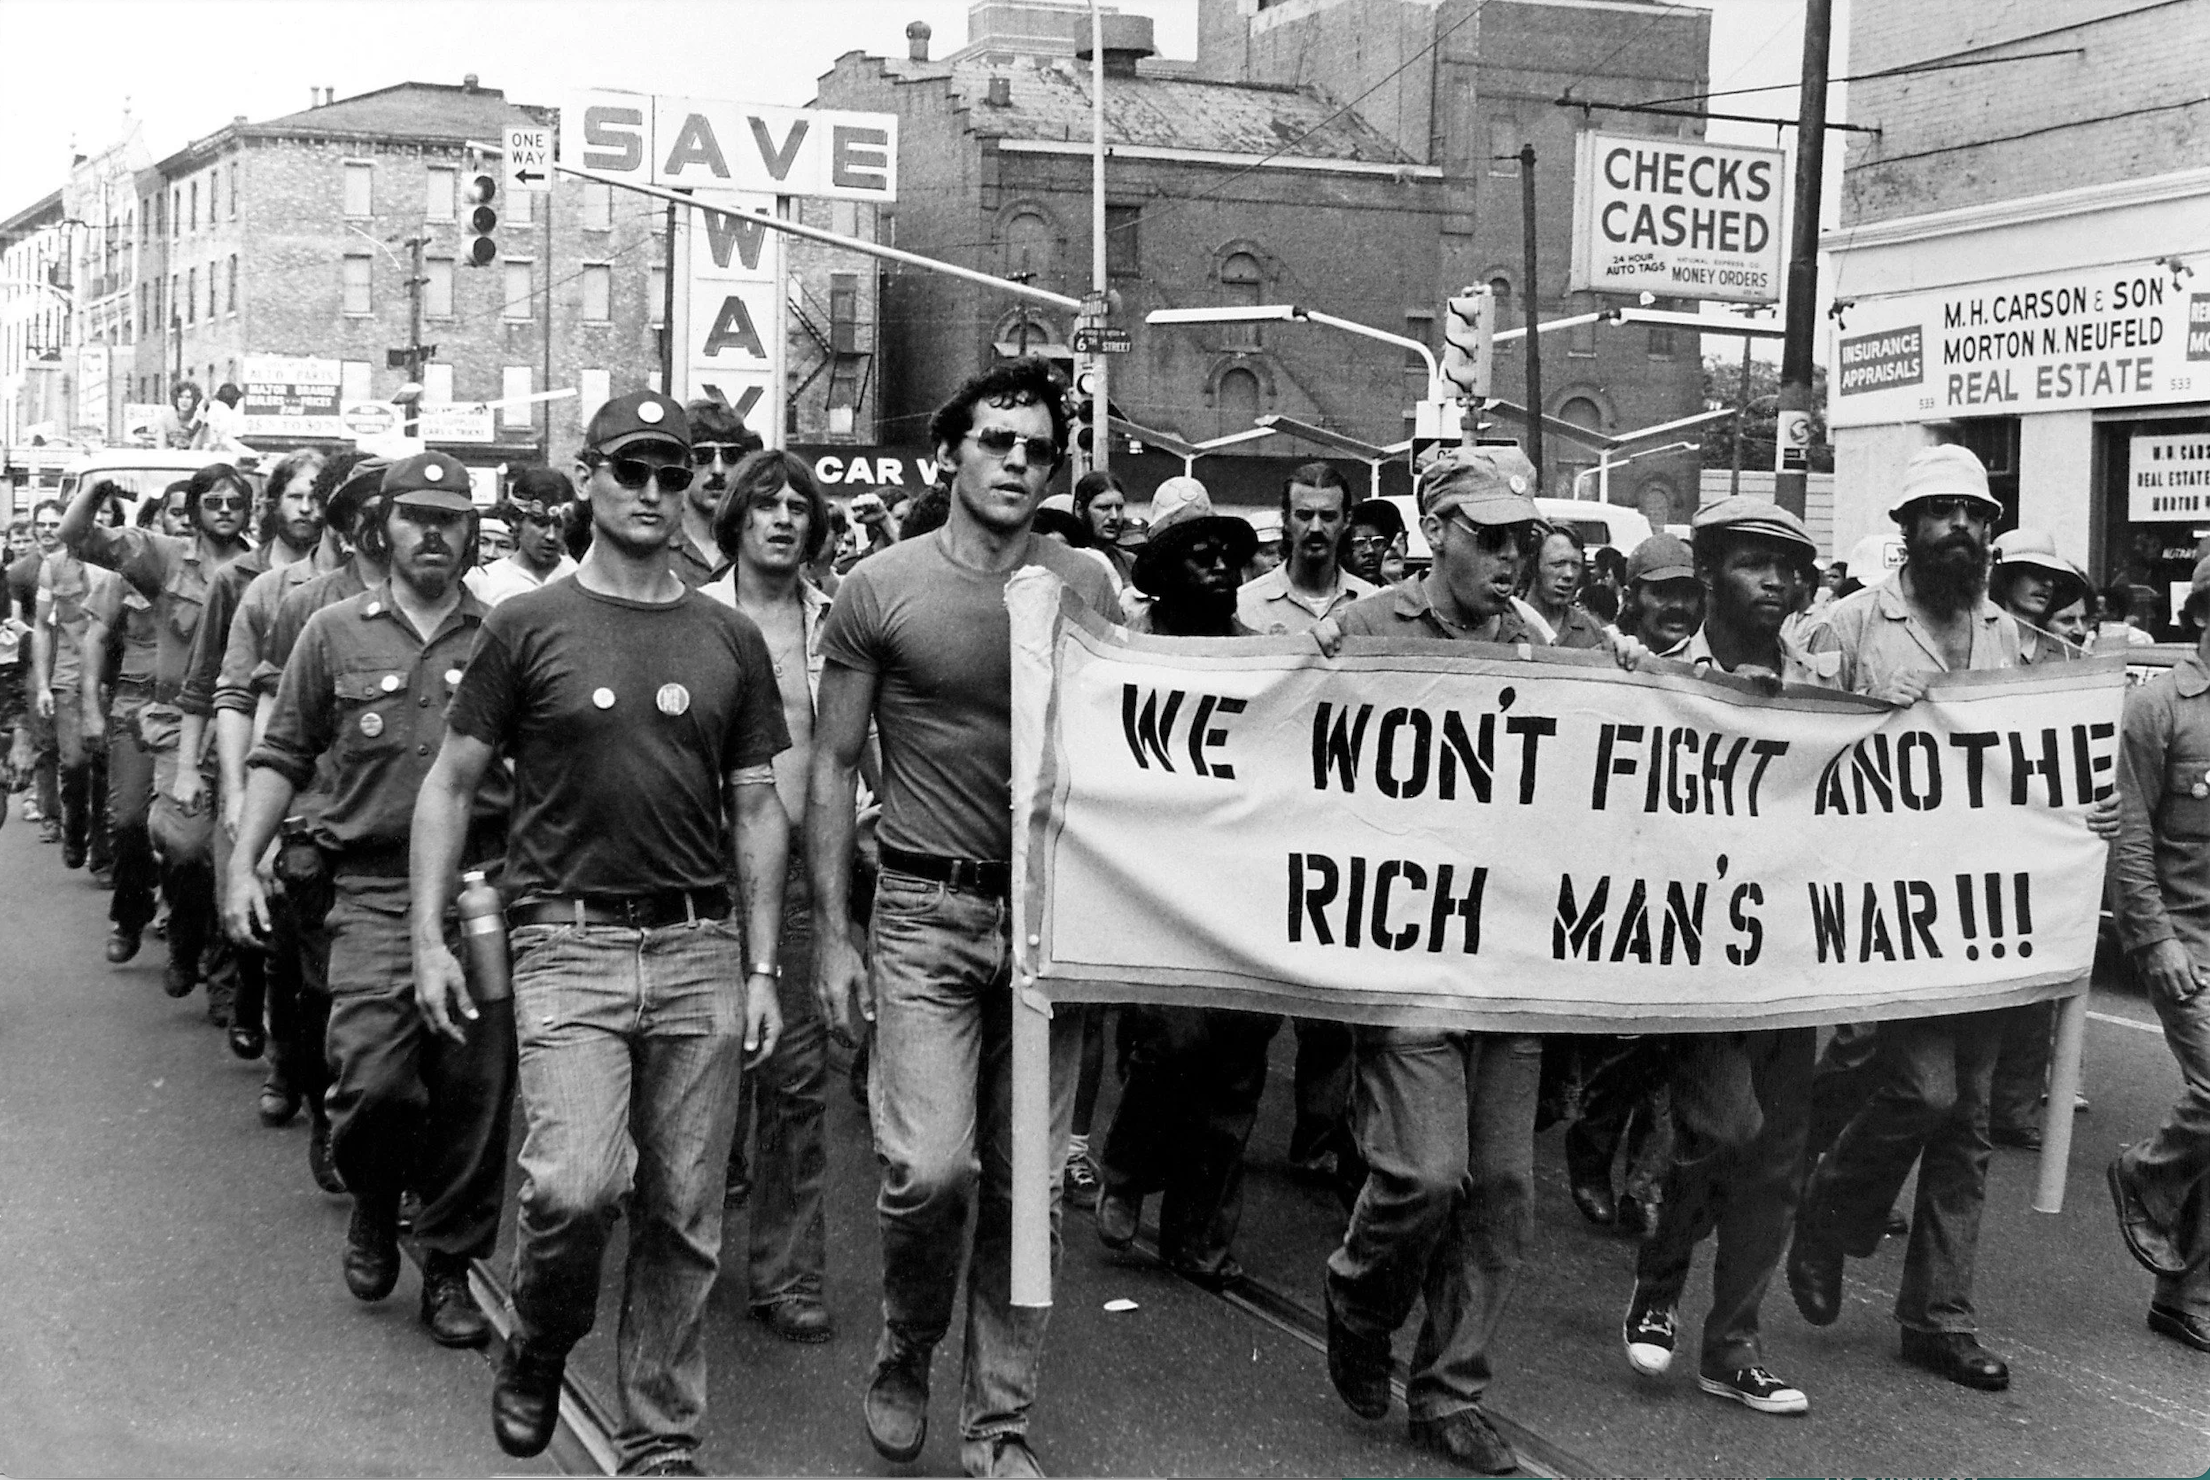 Photo of antiwar Vietnam veterans holding a banner that says: "We Won't Fight Another Rich Man's War!!!"